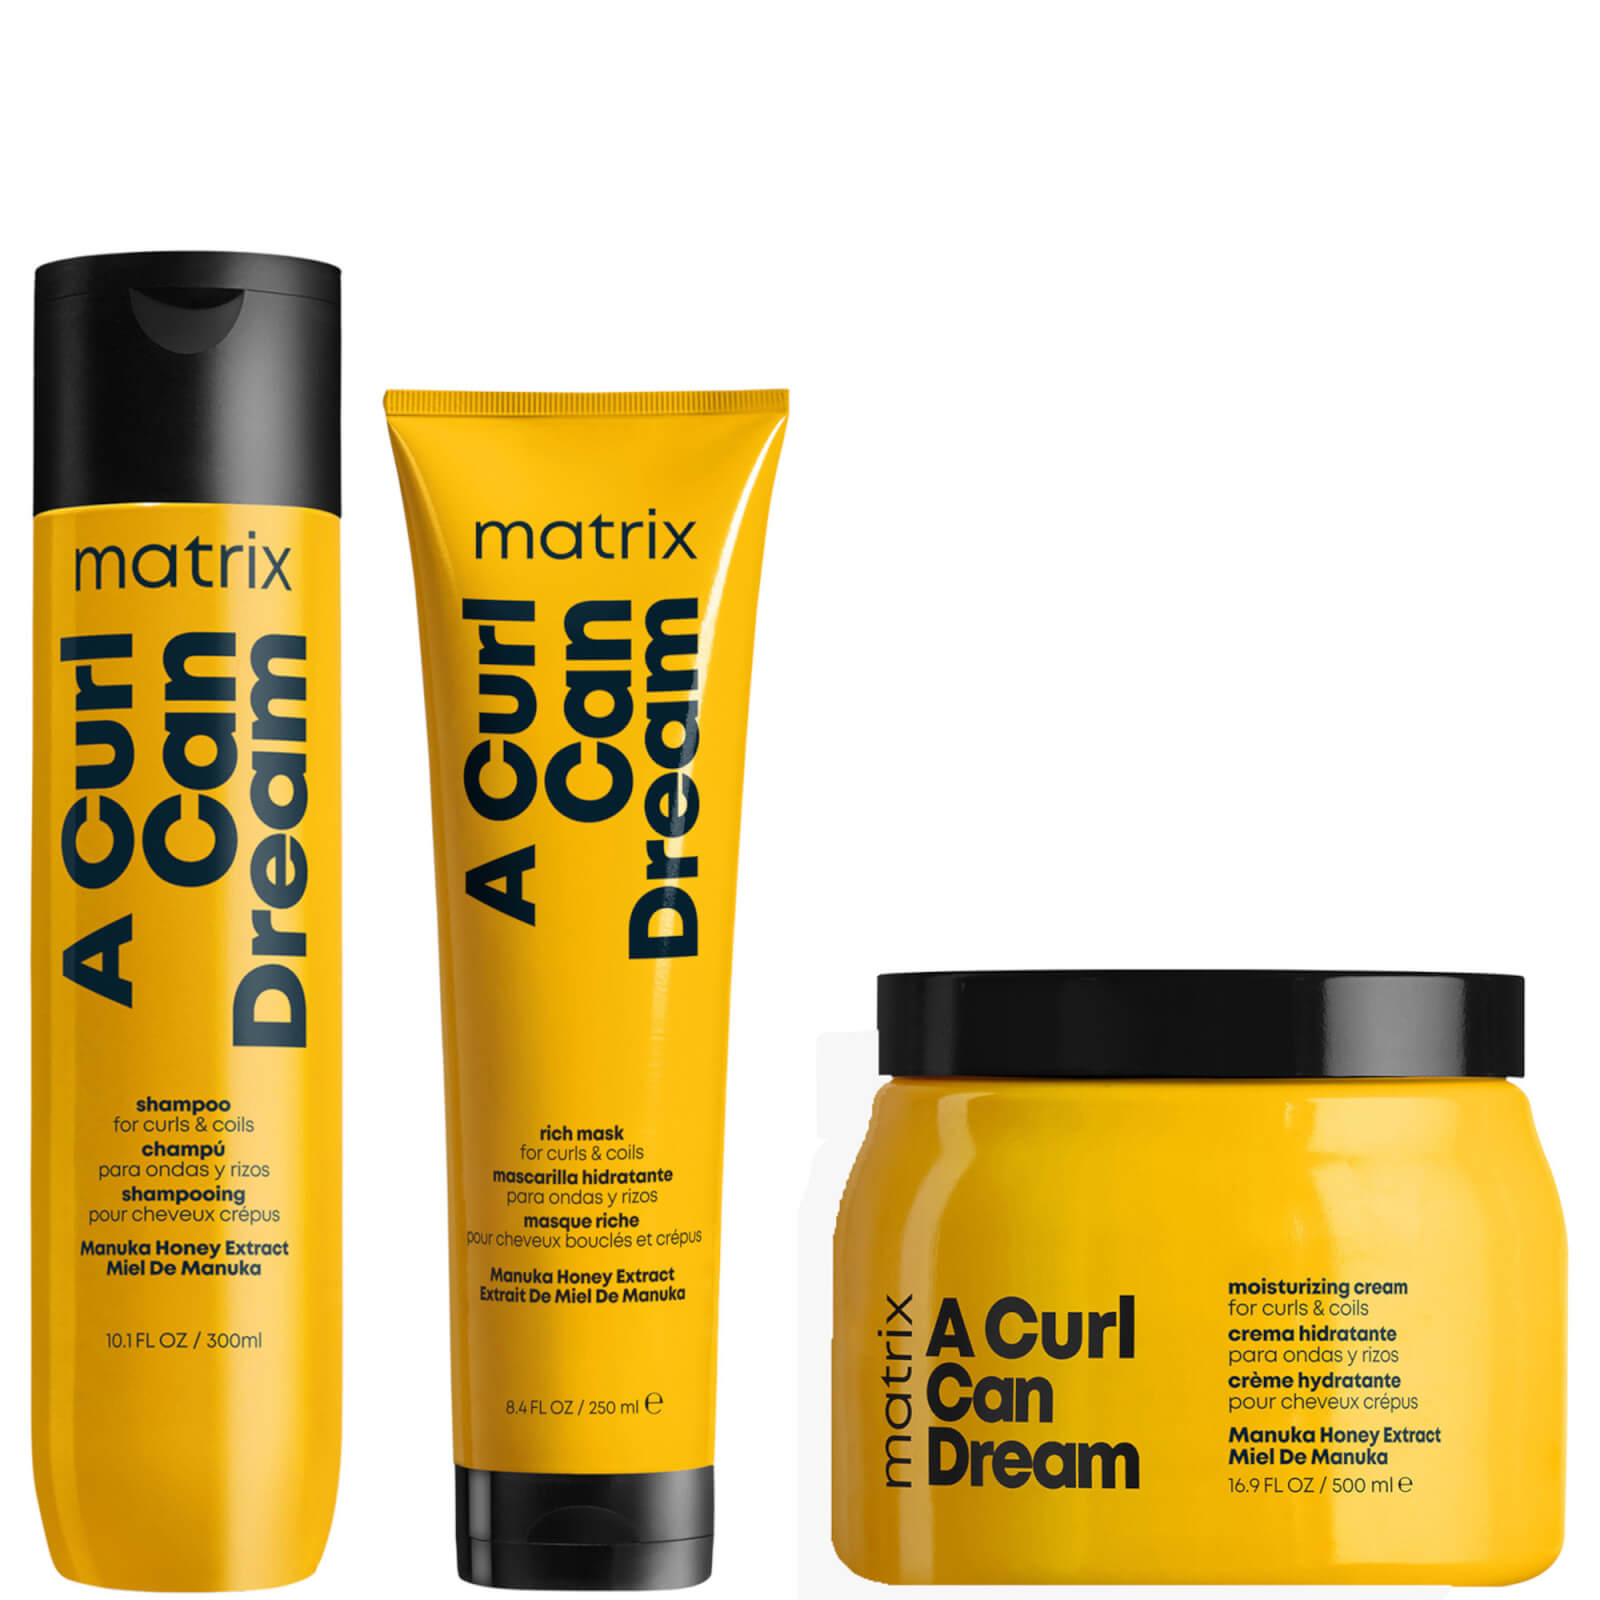 Image of Matrix A Curl Can Dream Manuka Honey Infused Shampoo, Mask and Leave-in Cream Routine for Curls and Coils